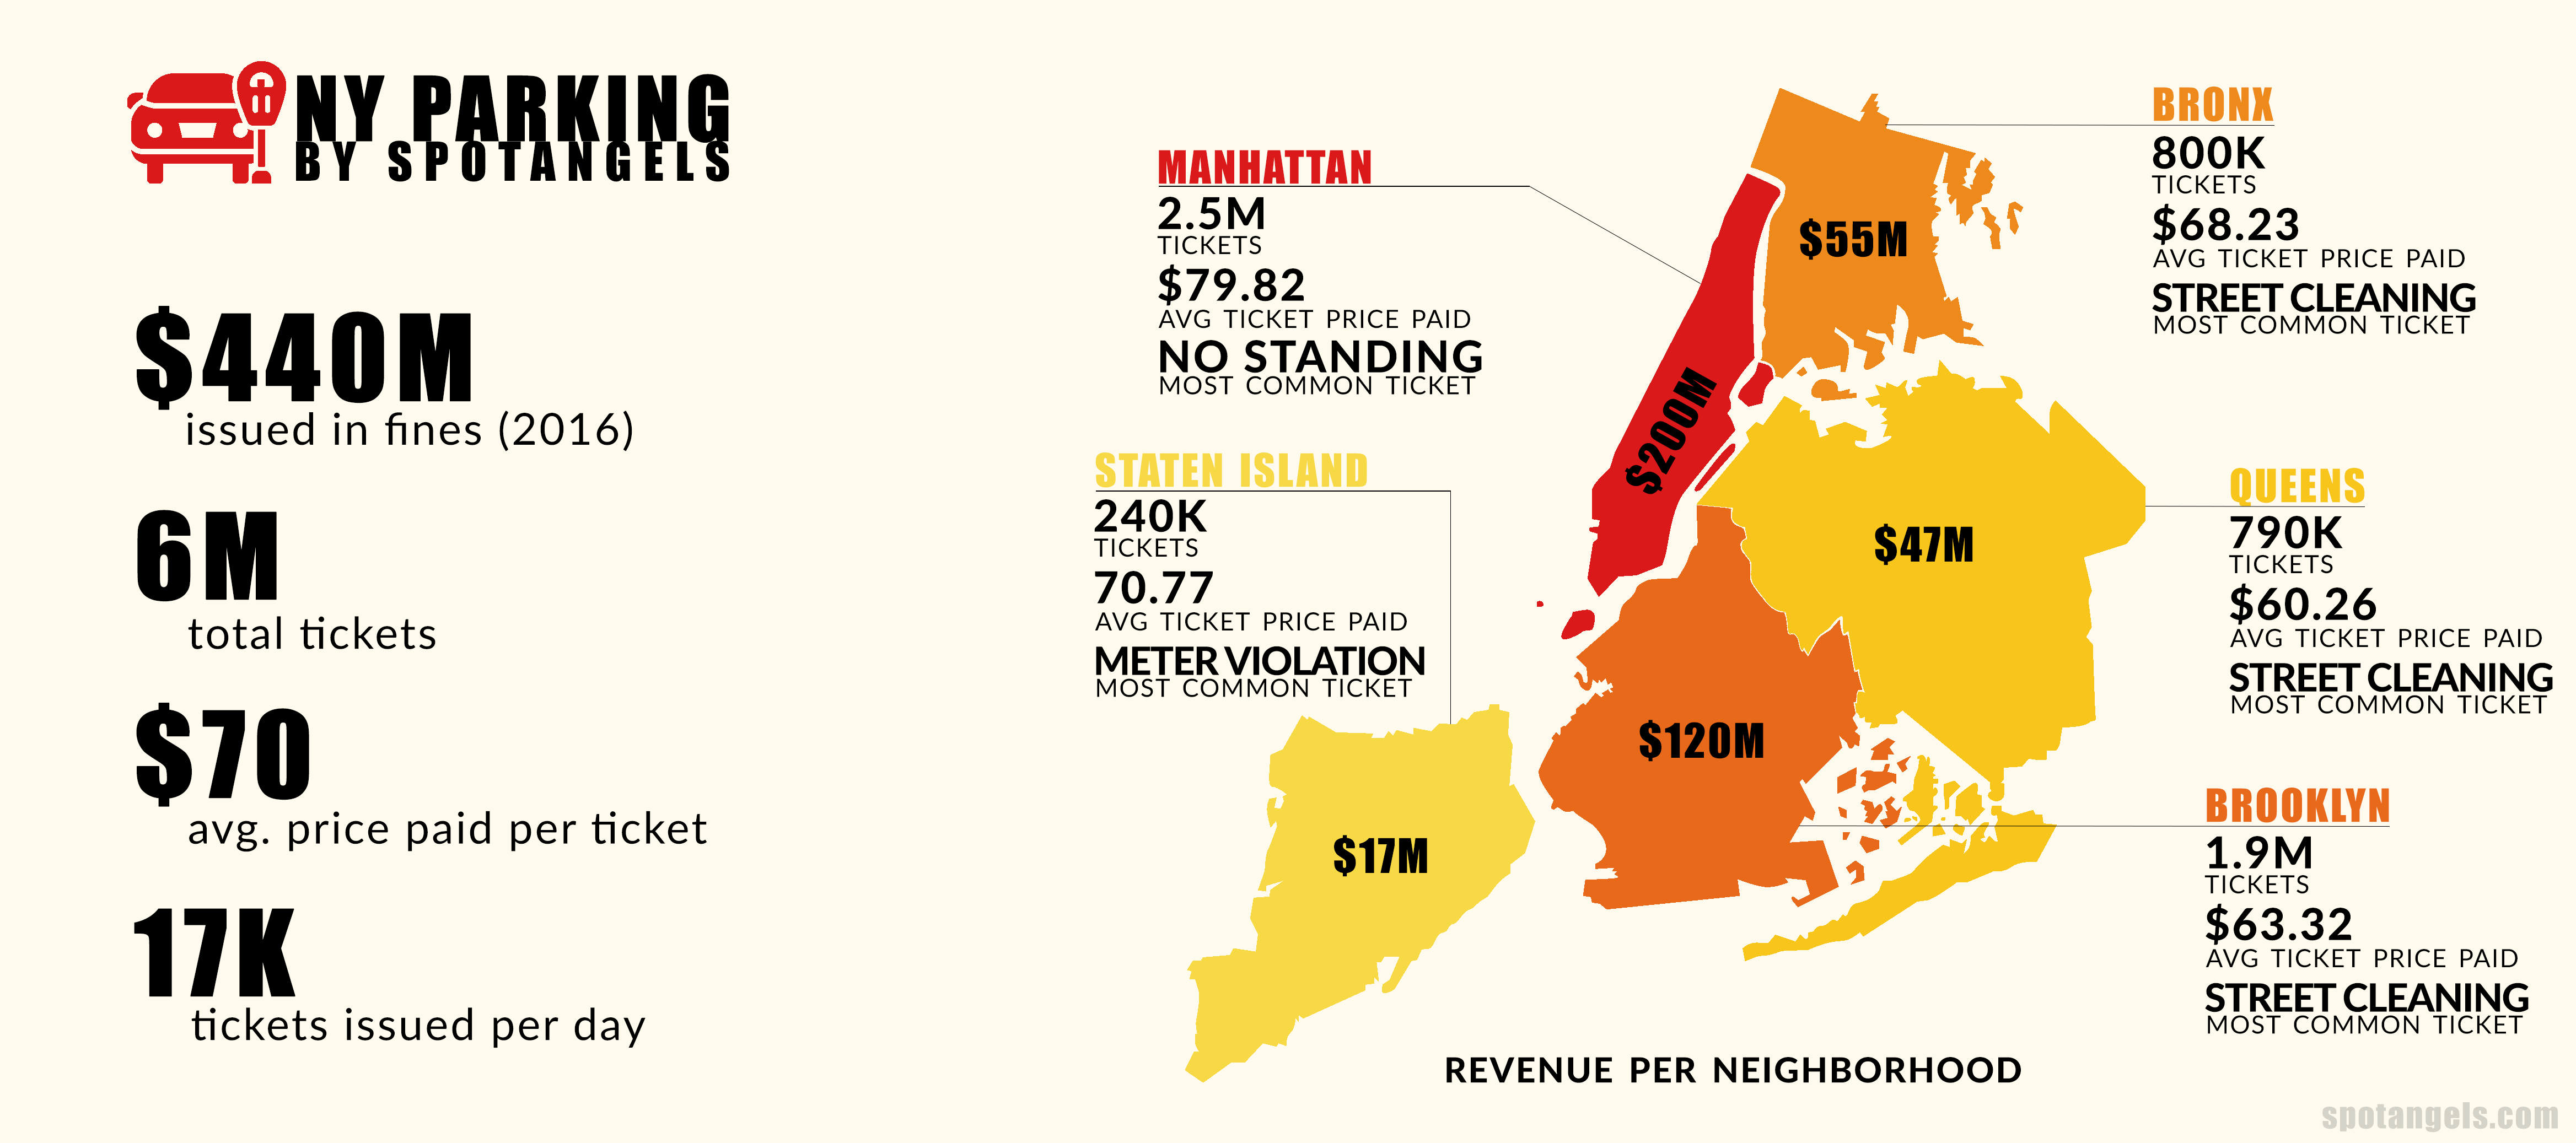 NYC Parking Tickets | The Most Ticketed Neighborhoods in NYC